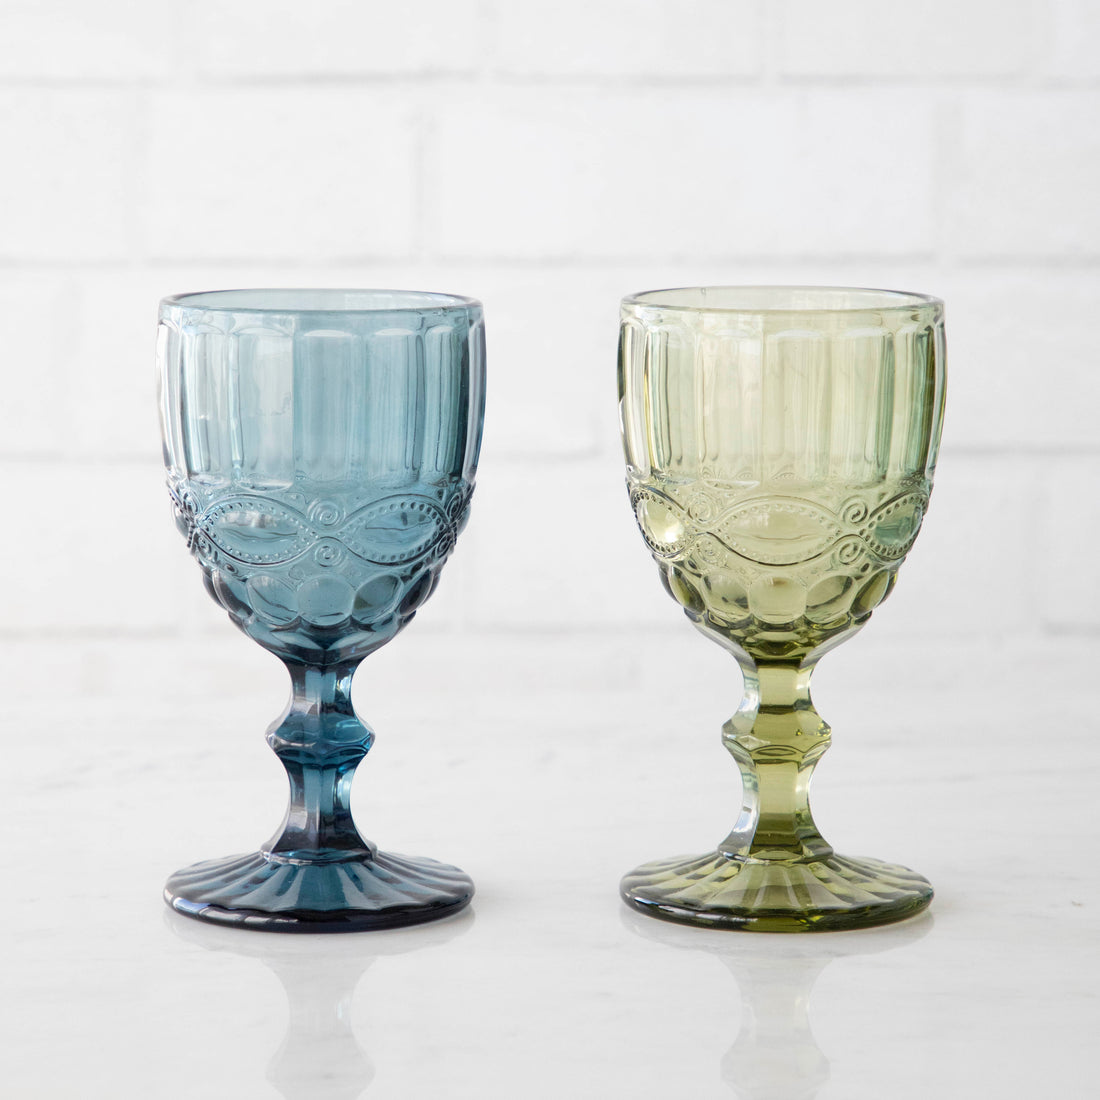 Two Momento Coupe Glasses by Accent Decor sitting on top of a white plate in a vintage style.